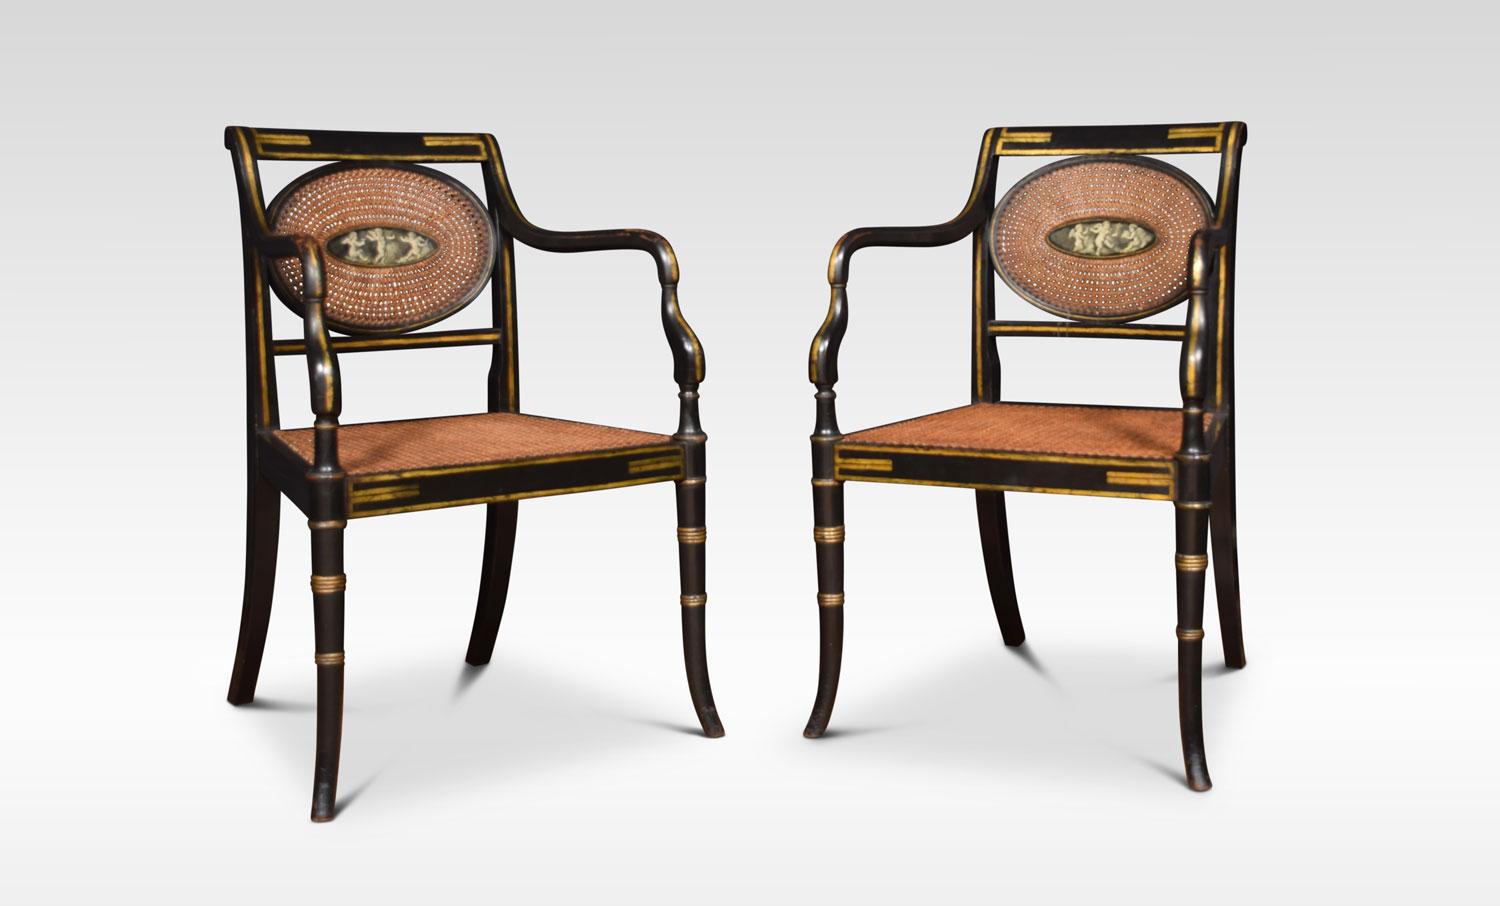 Refined set of eight English Regency style cane armchairs, Classic in form with an ebonized finish and original gold painted details. The backrest with central oval painting depicting three cherubs, each chair has a different design. Above cane work